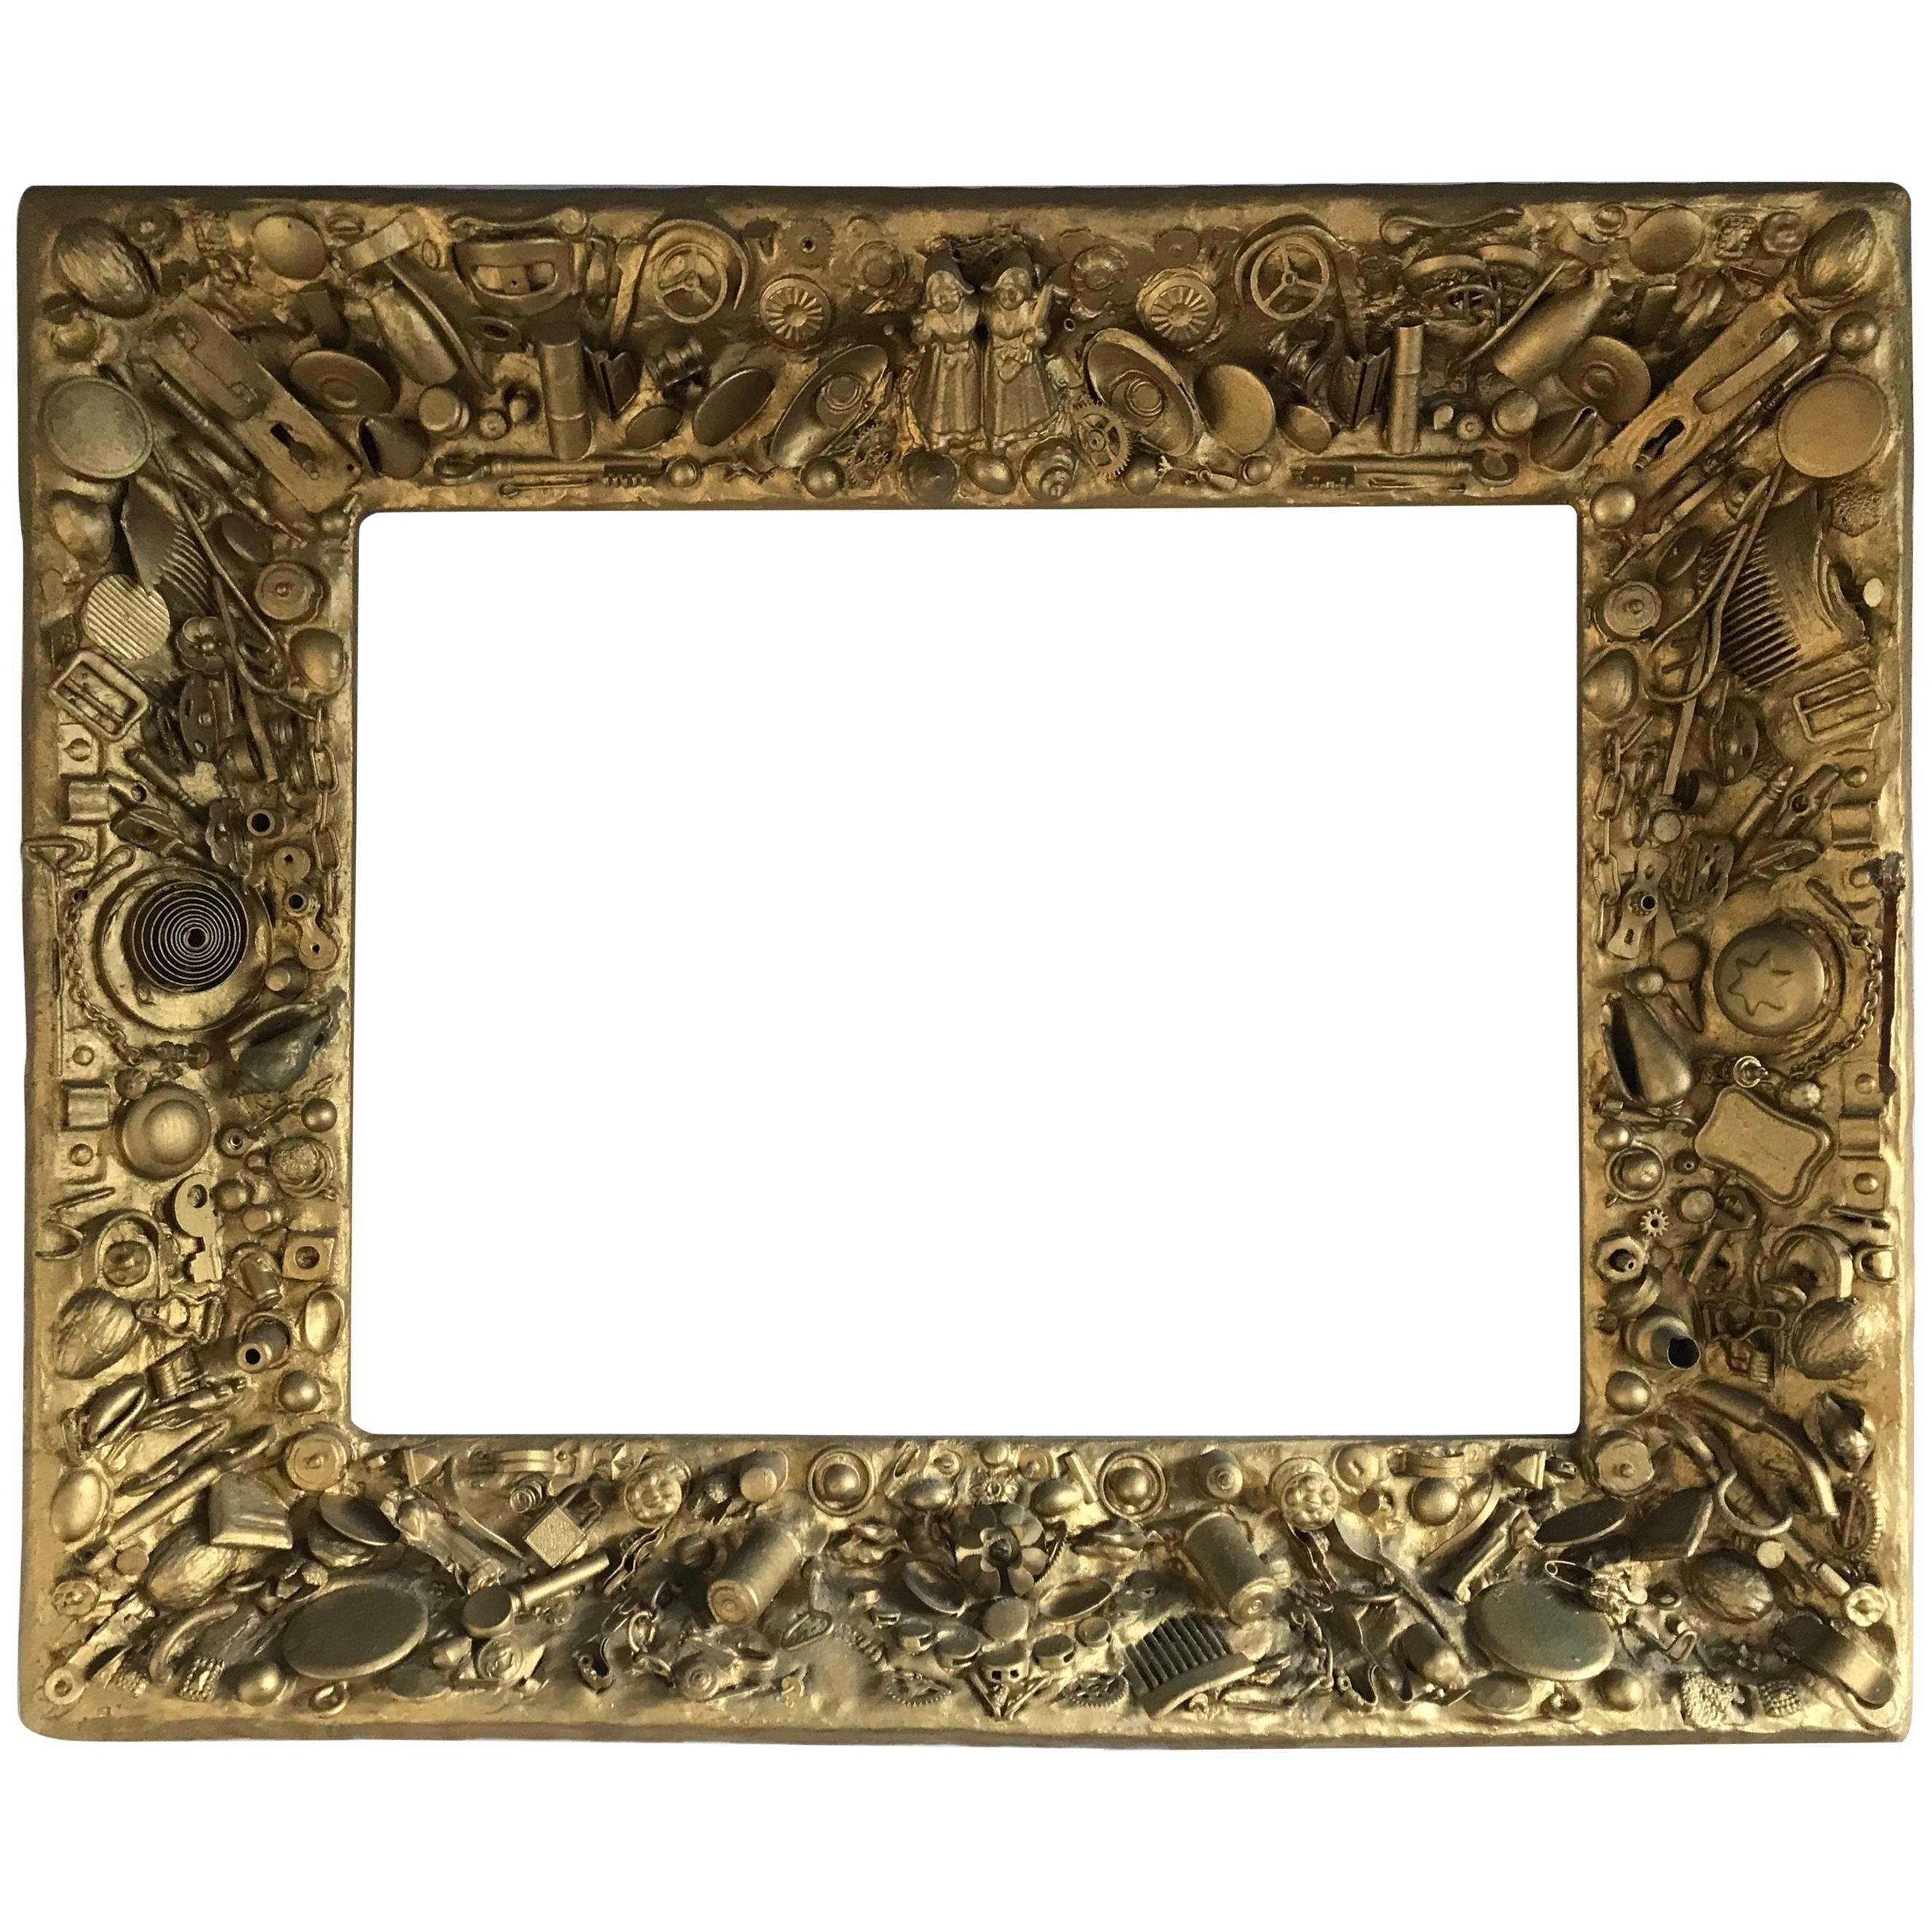 Rare Vintage Gold Colored Collecting Fine Art Mirror or Picture Frame For Sale